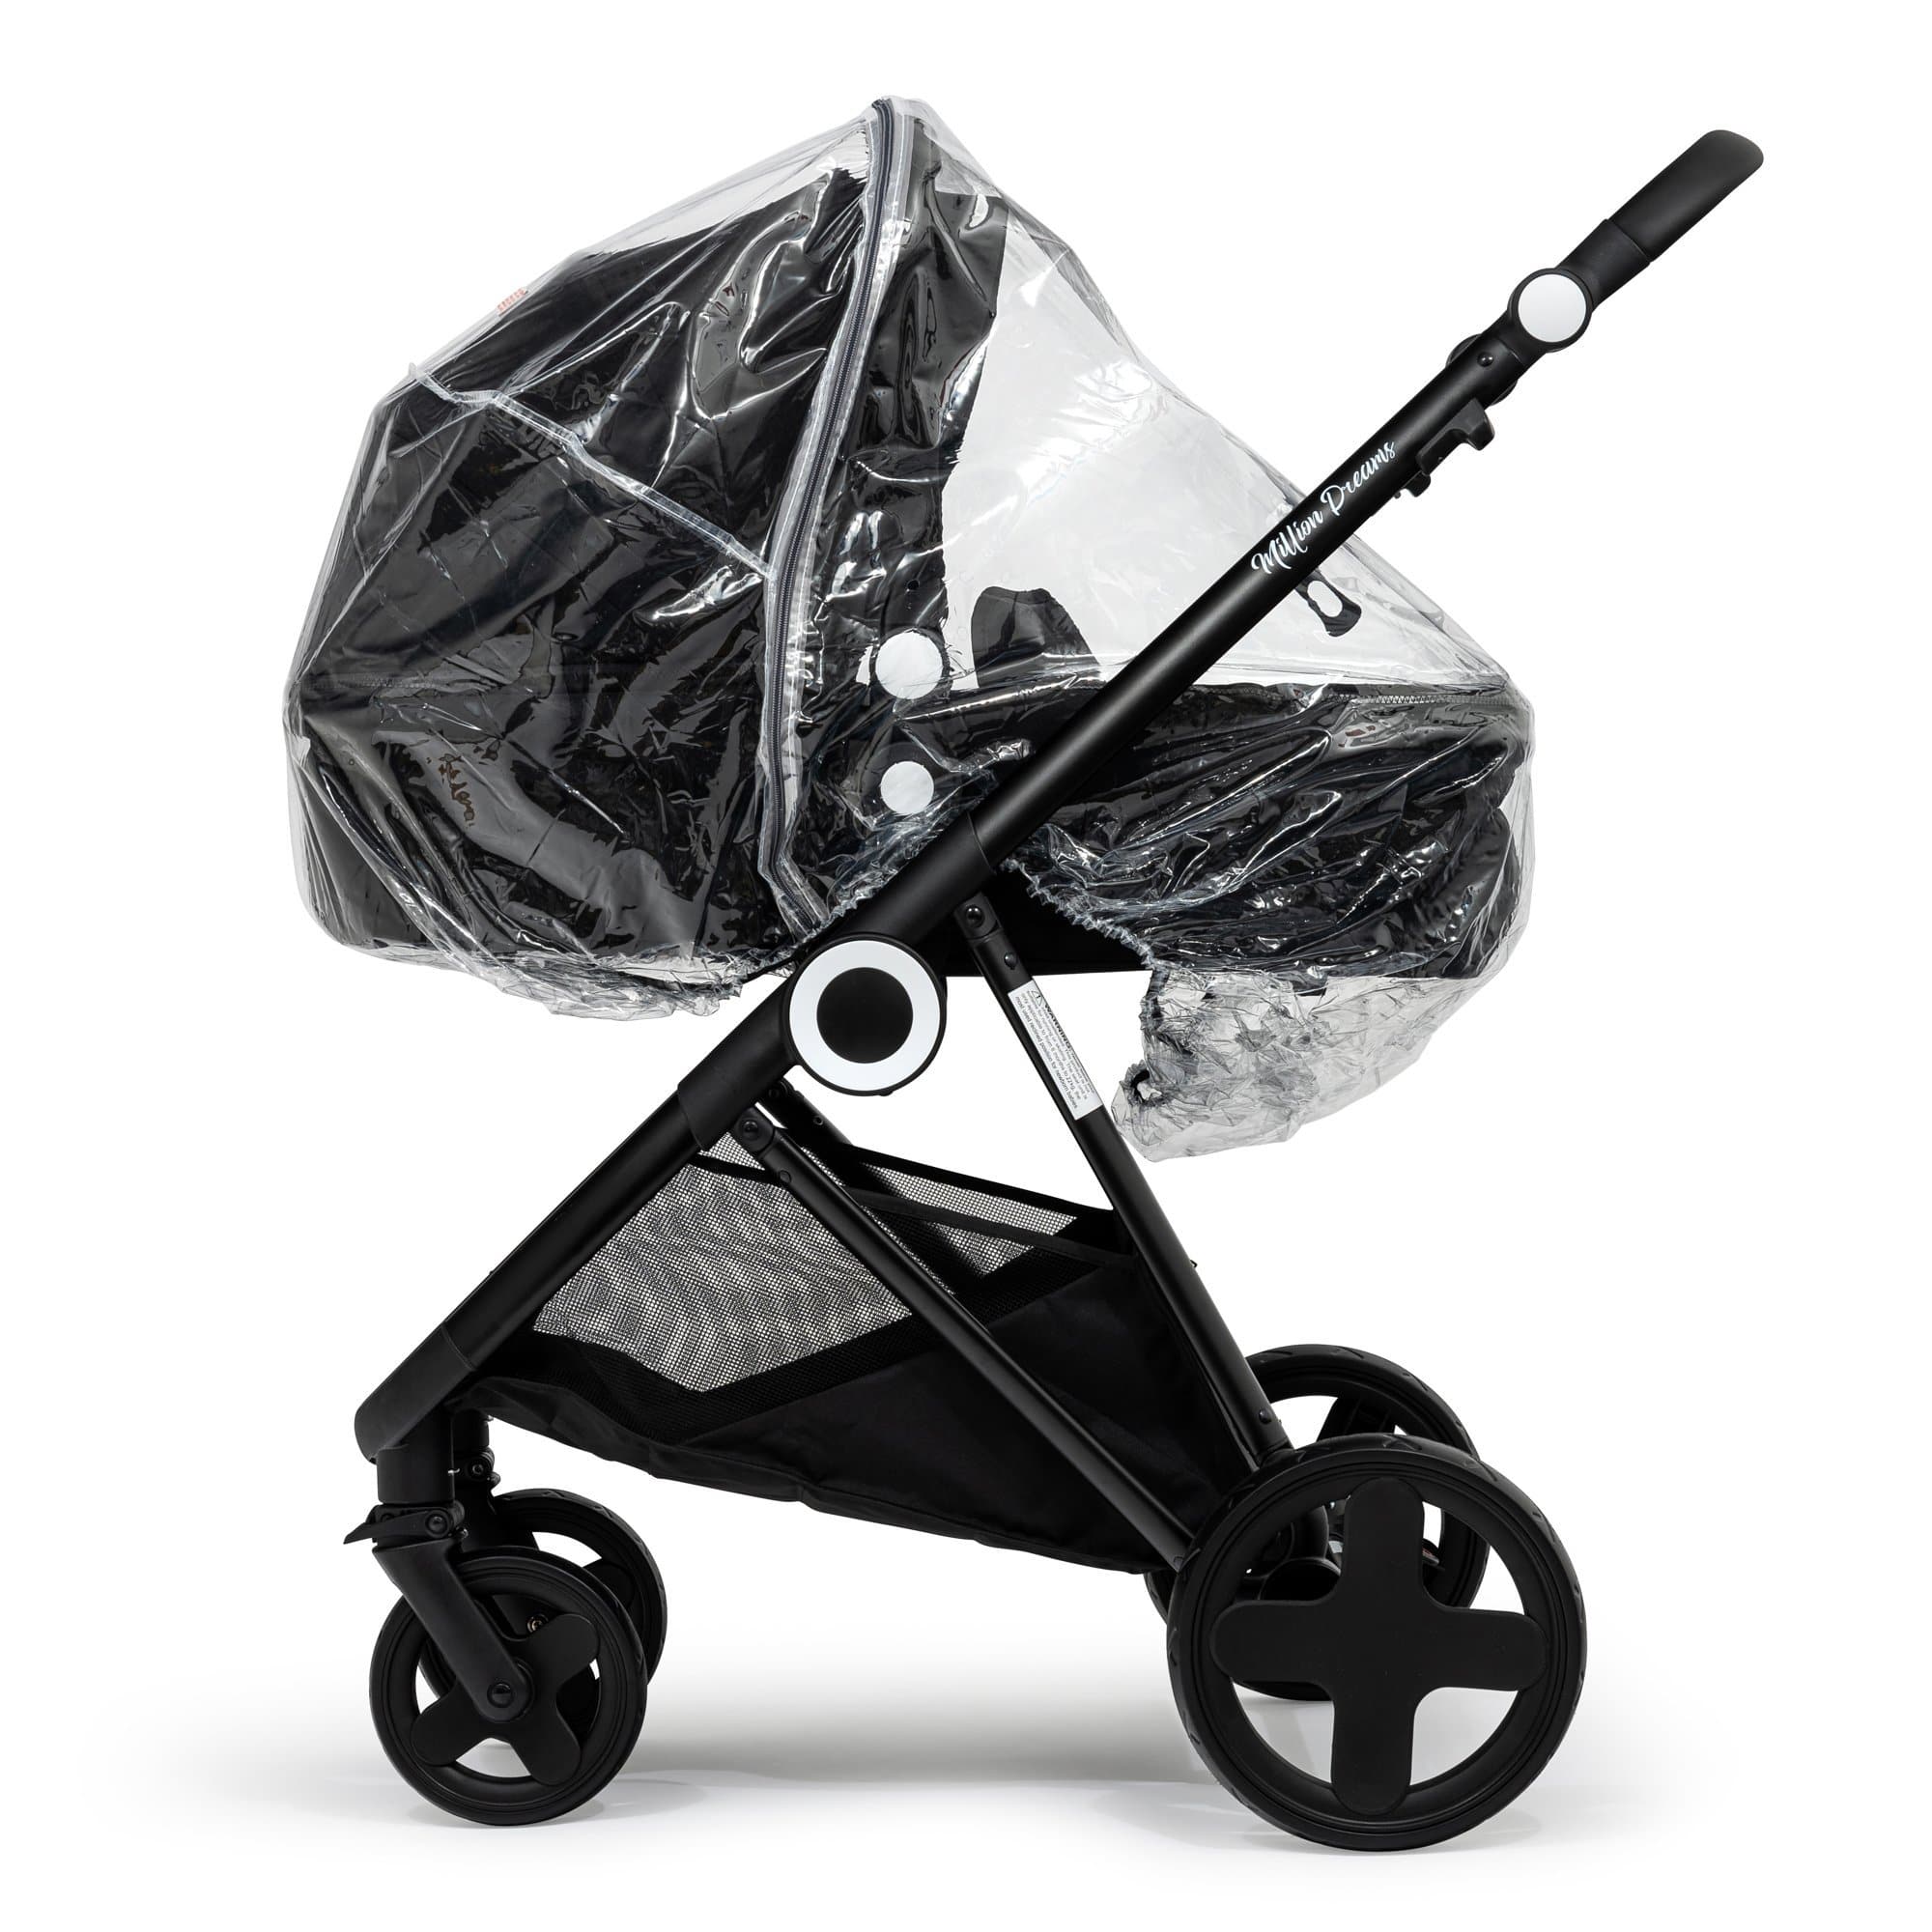 2 in 1 Rain Cover Compatible with Bebe Confort - Fits All Models - For Your Little One